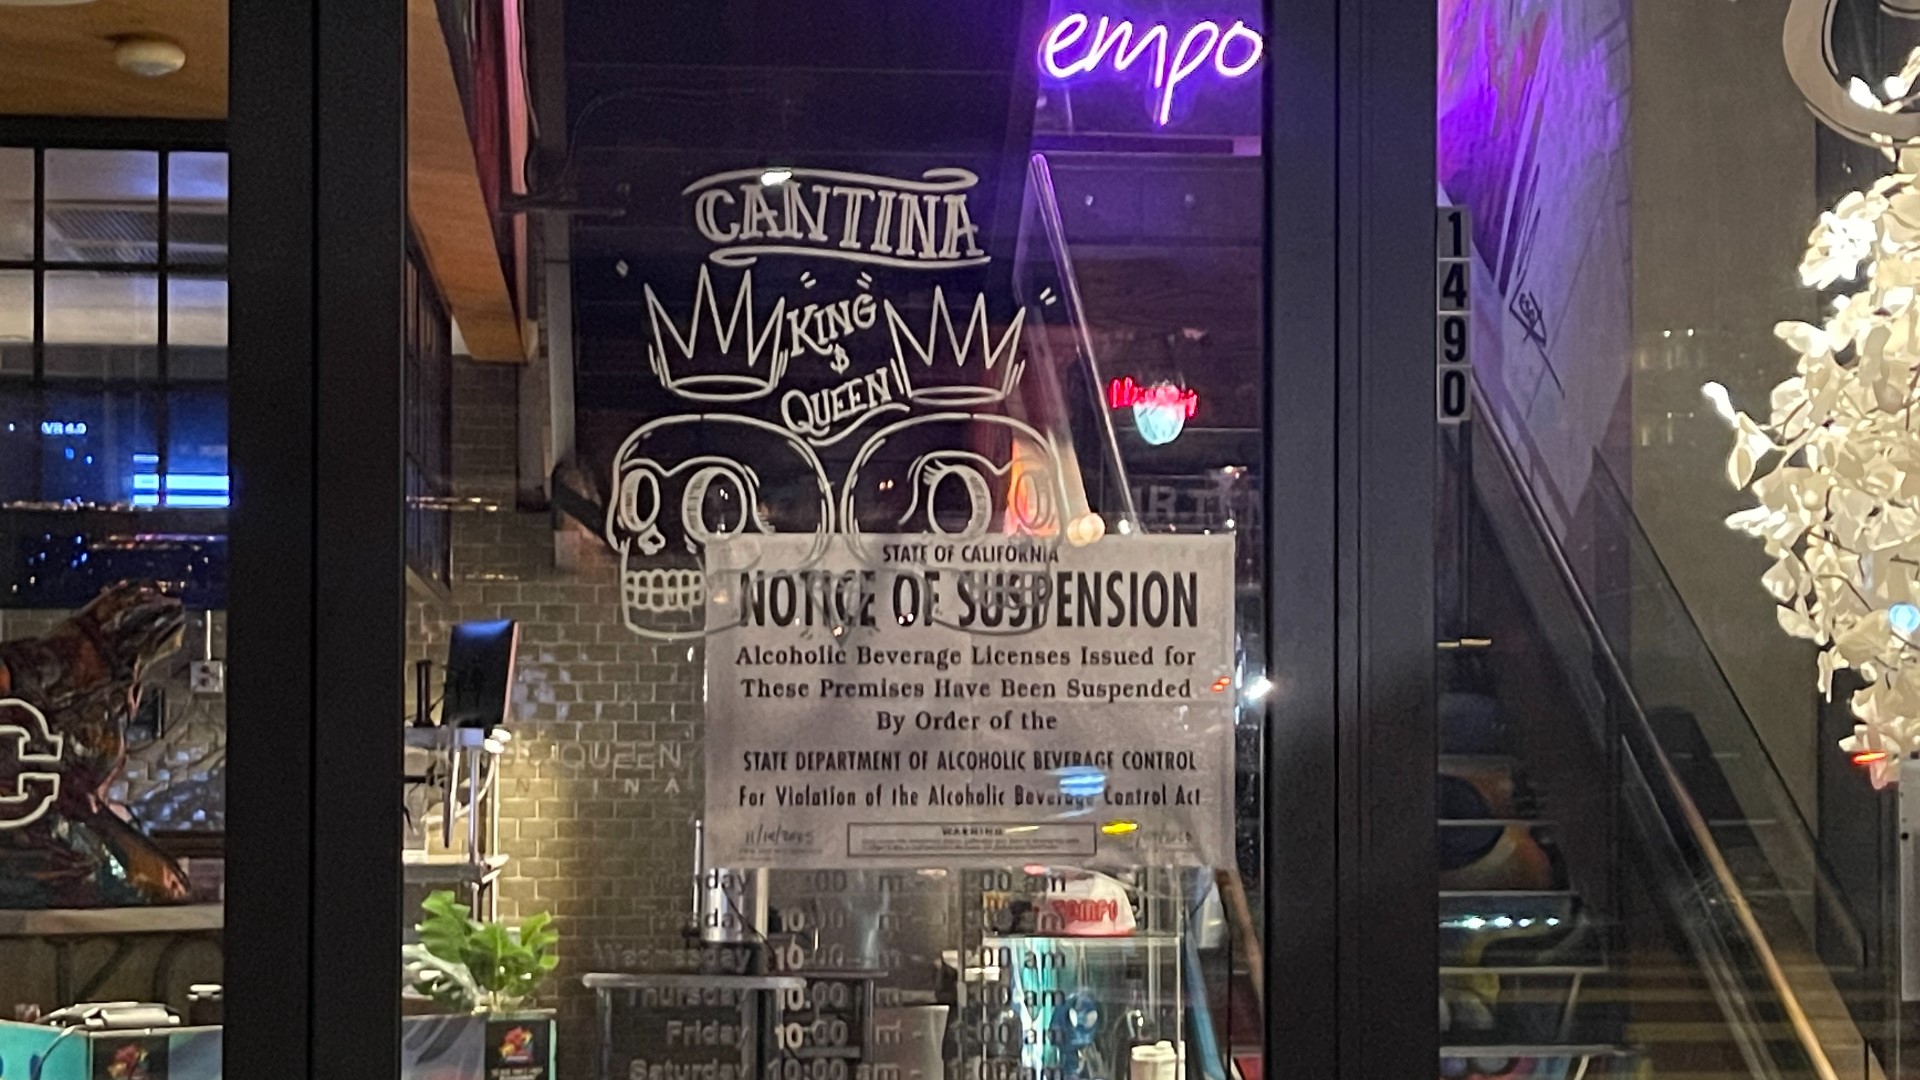 King and queen cantina menu